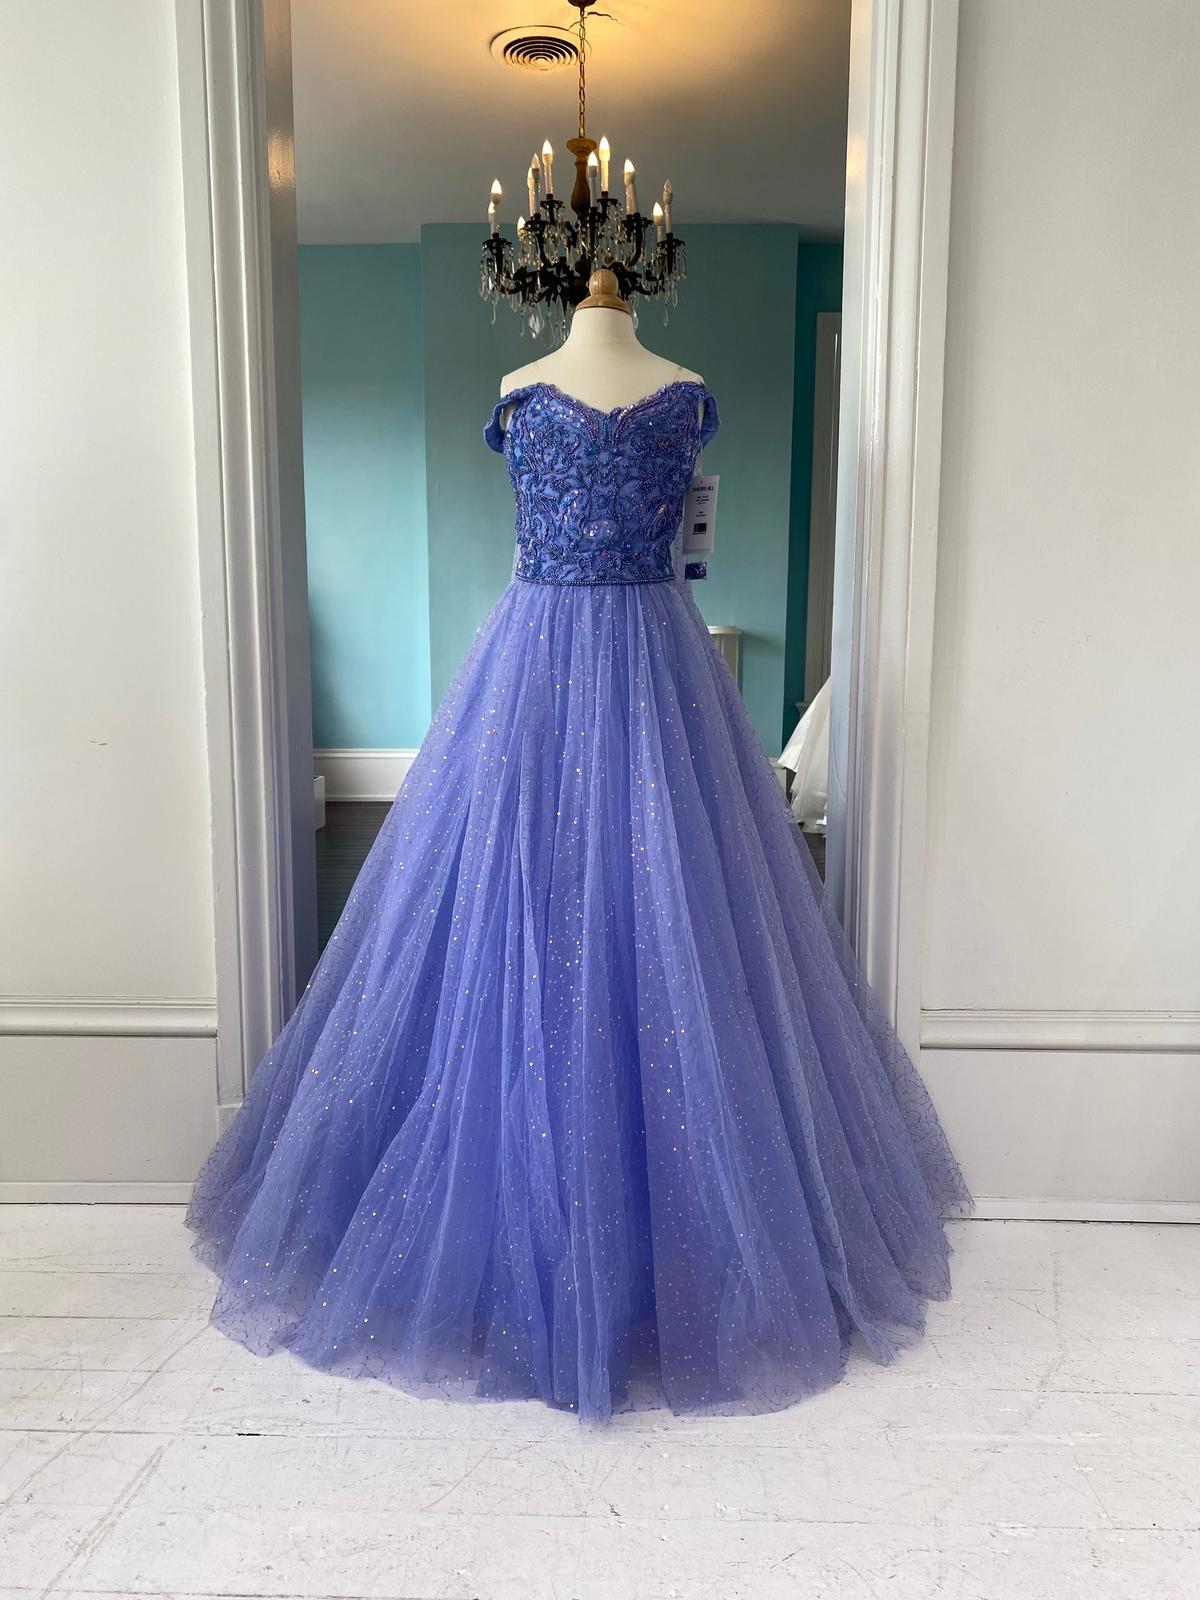 Sherri Hill Children's Periwinkle Pageant Gown K55433